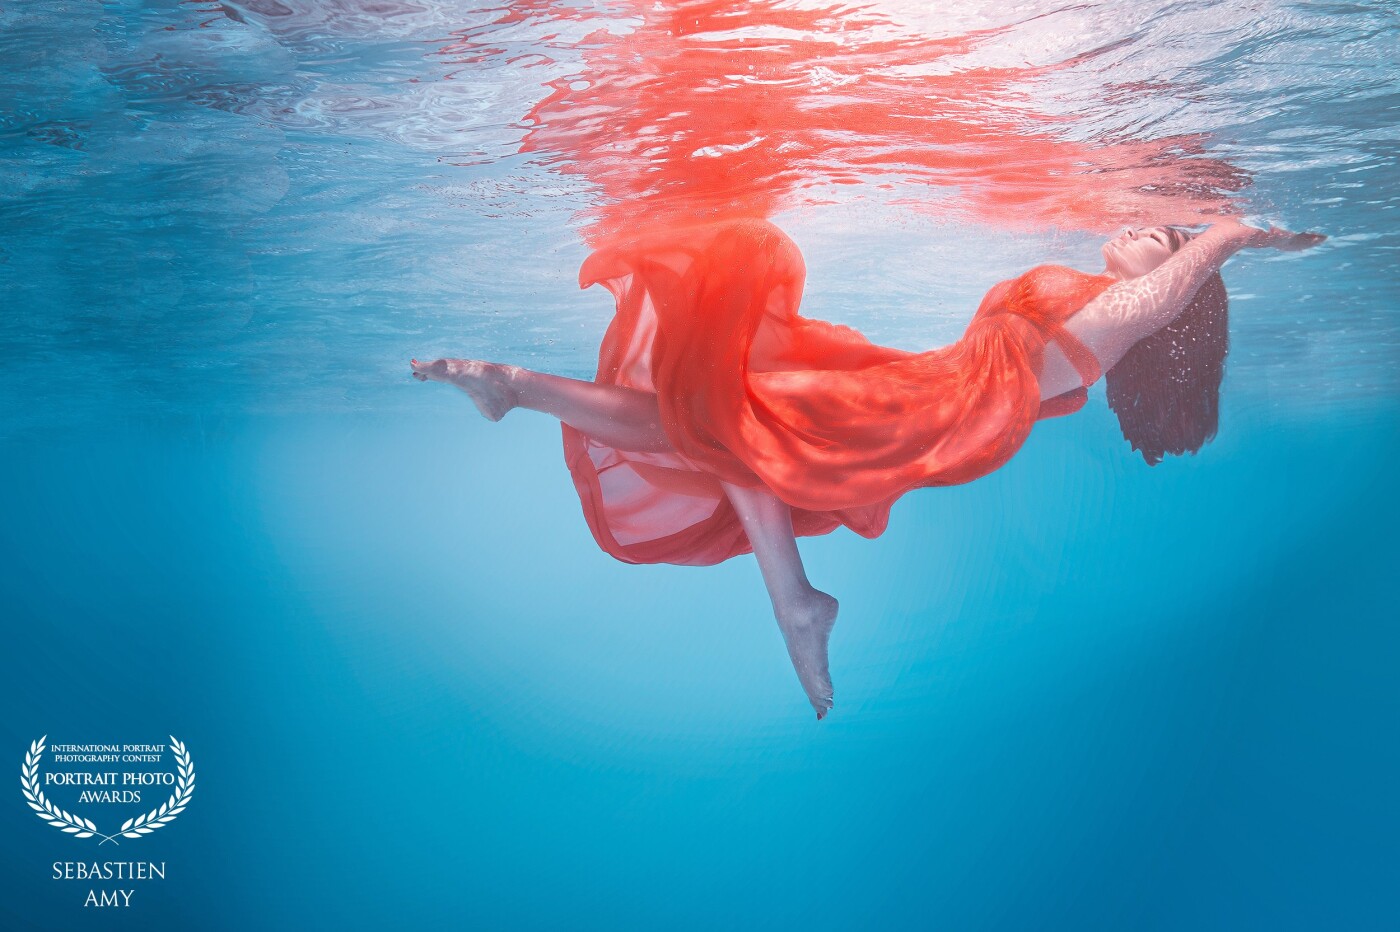 The other side<br />
With this project we really pushed ourself out of comfort zone. Taking pictures underwater is quite a thing but it’s also such a cool experience! Thanks to my brave swimming model Agathe!